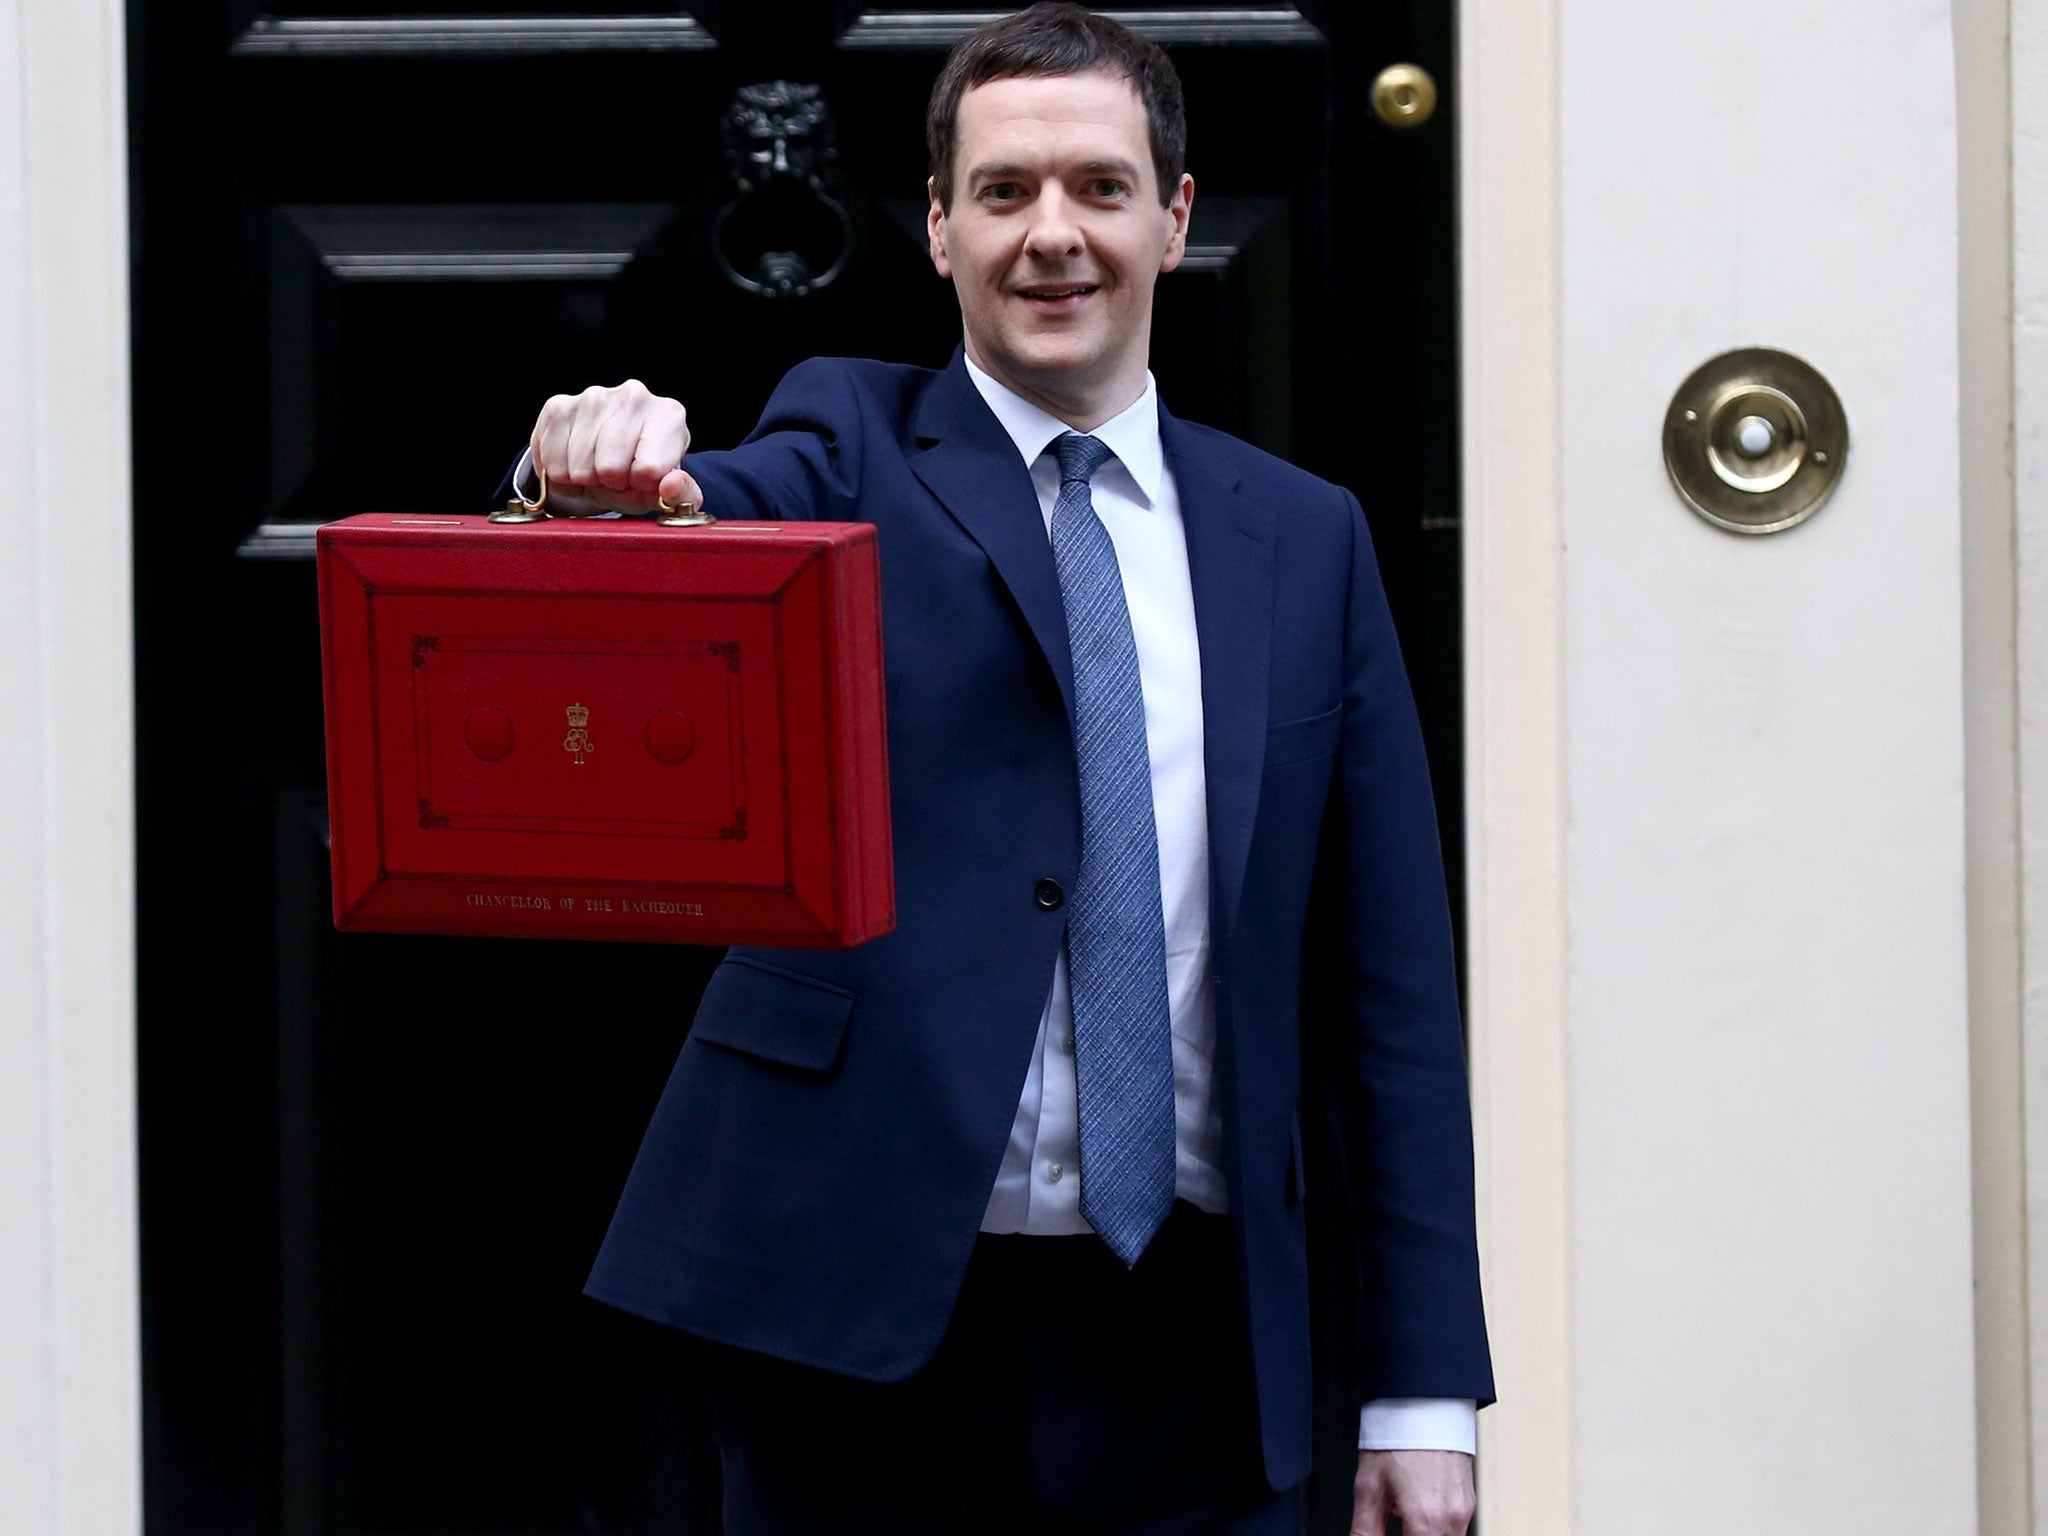 Osborne is expected to renew his commitment to austerity